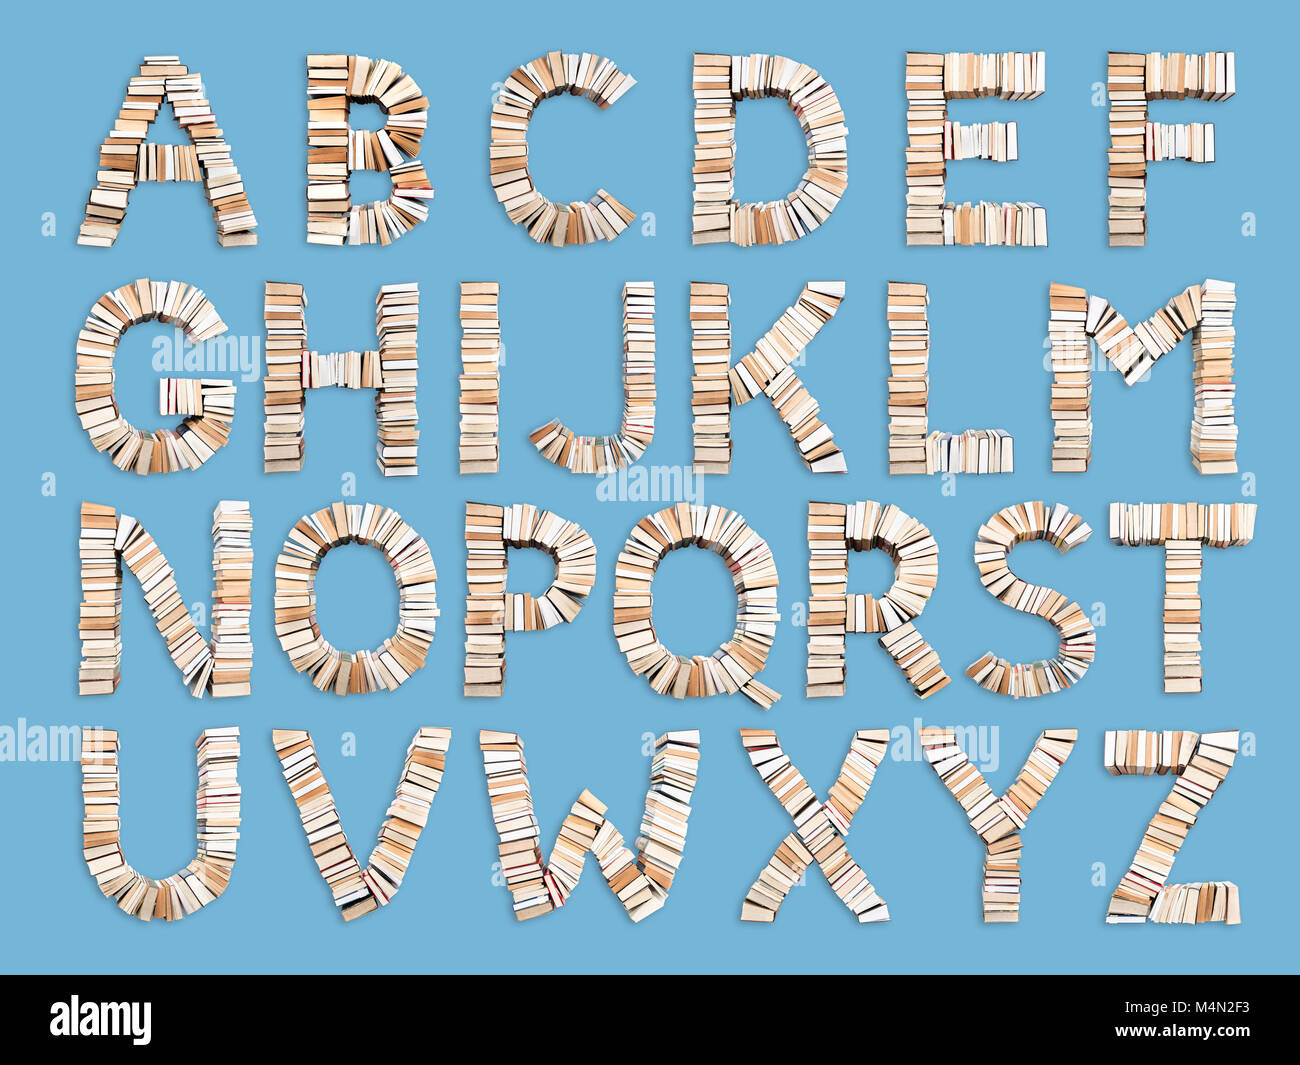 Set of capital Alphabet letters formed from books, shot from above on light blue background Stock Photo